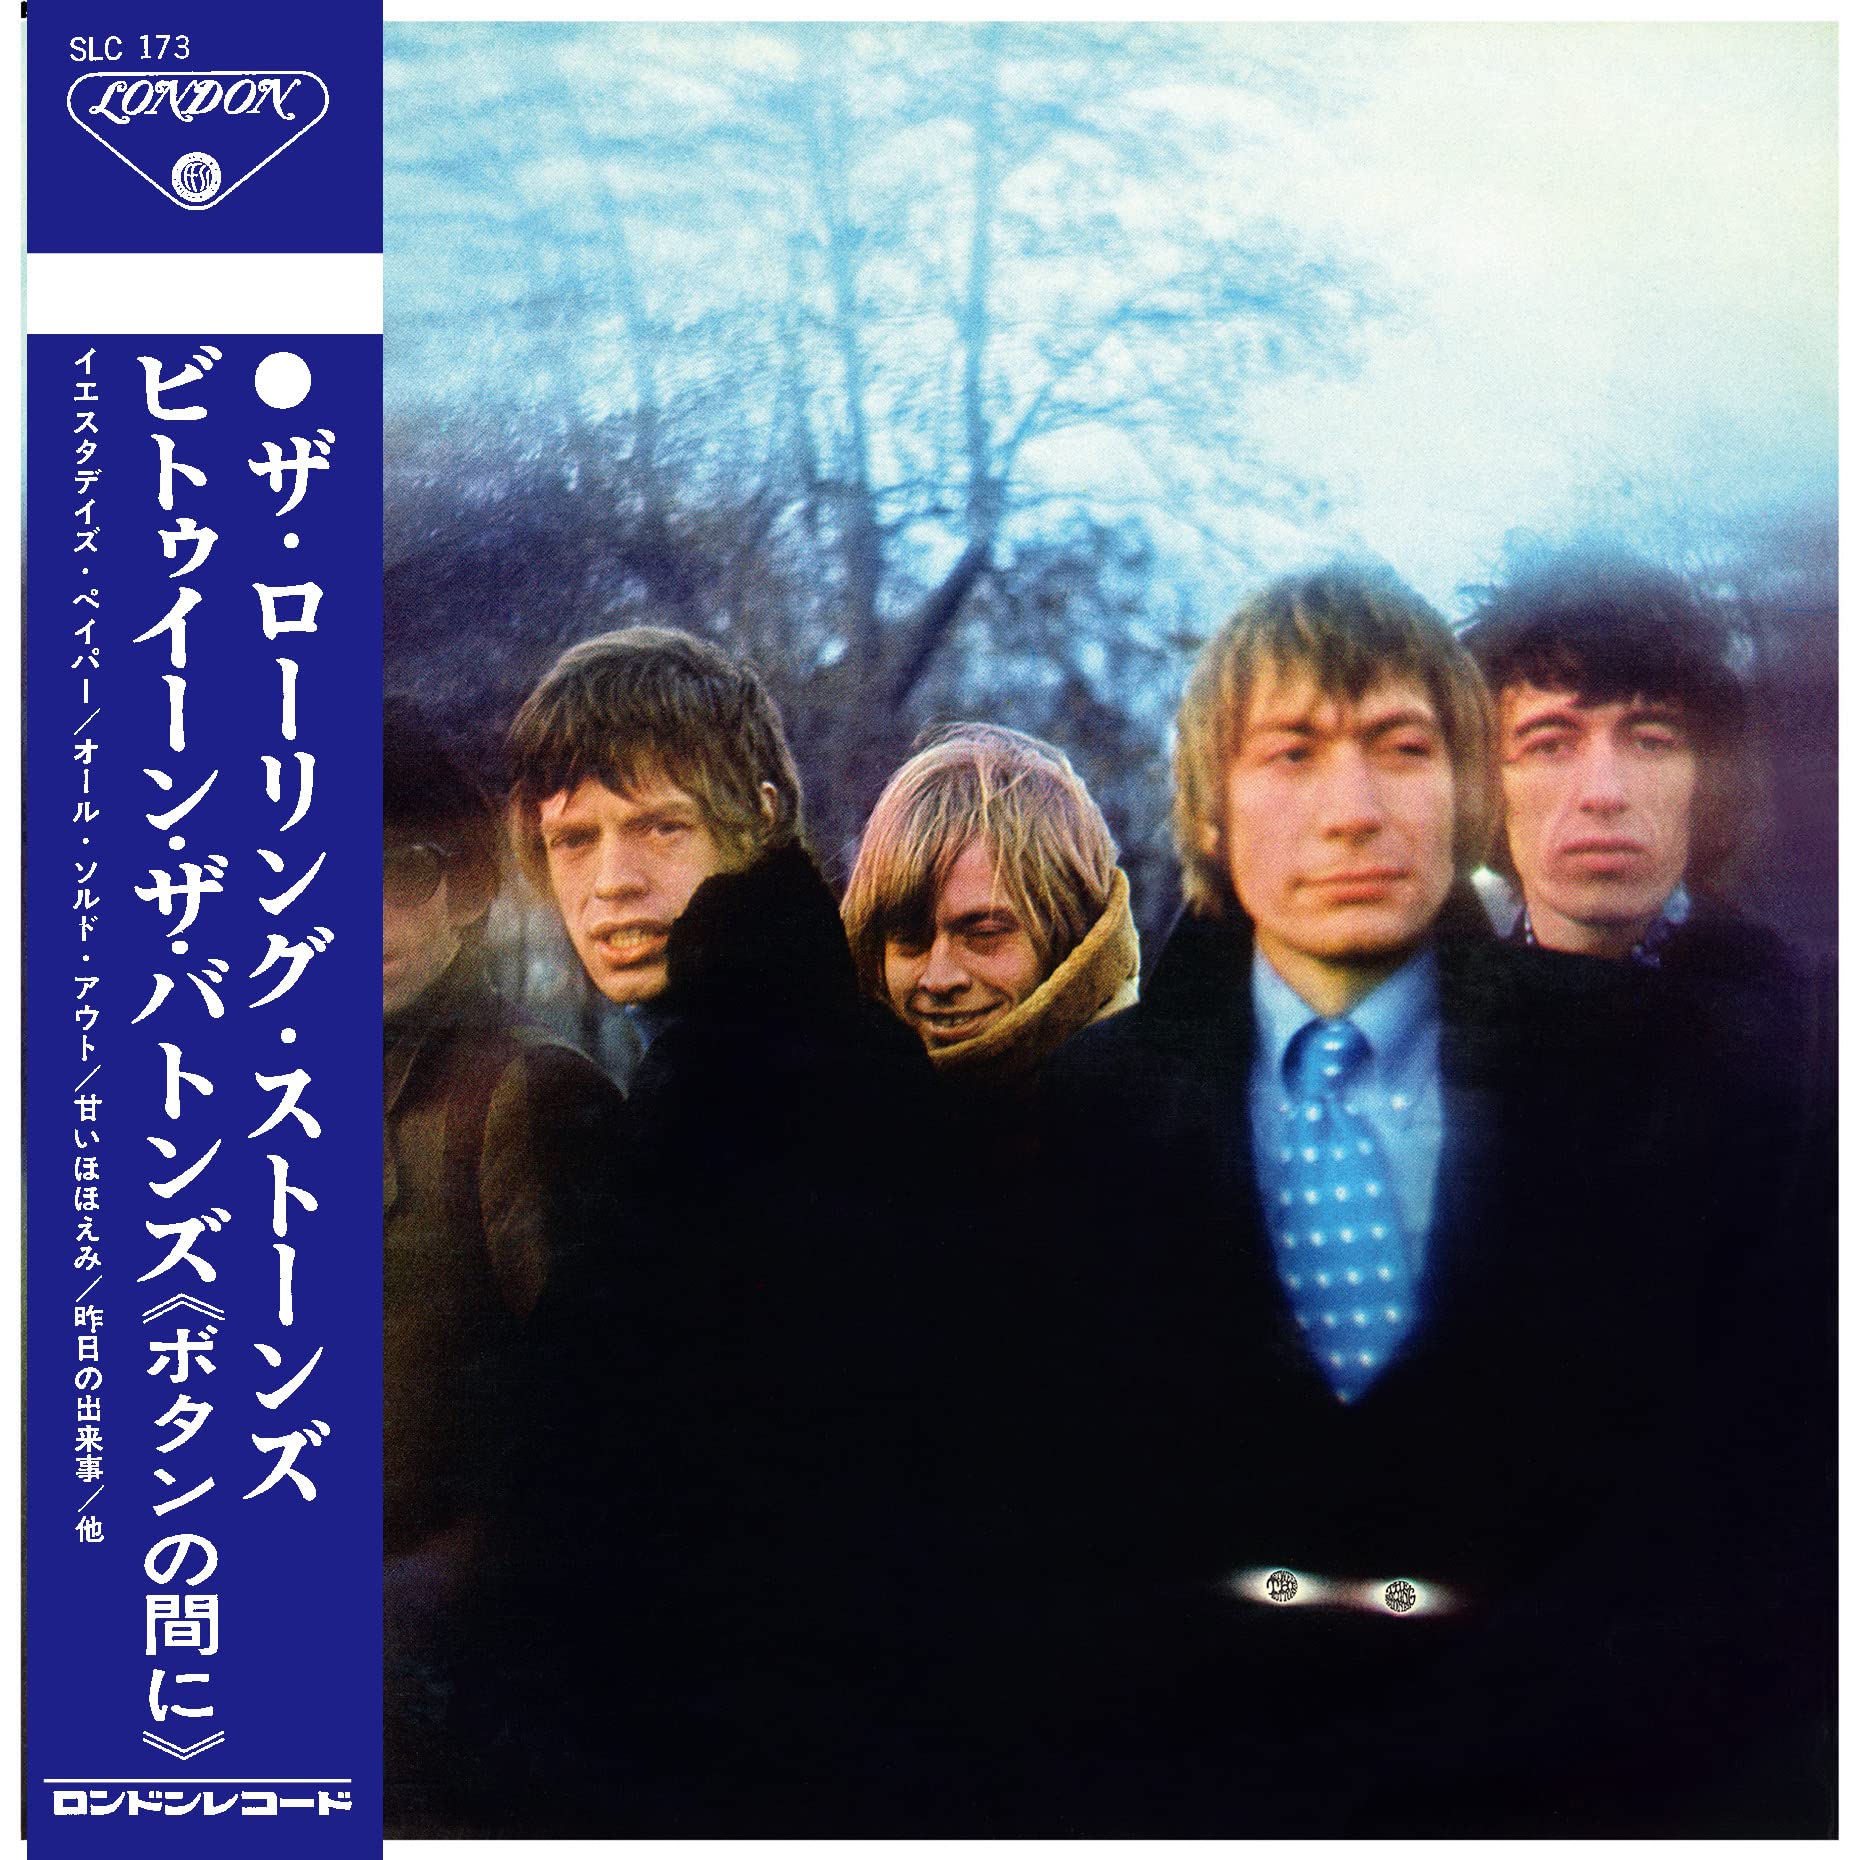 Between The Buttons – Mono SHM on MovieShack